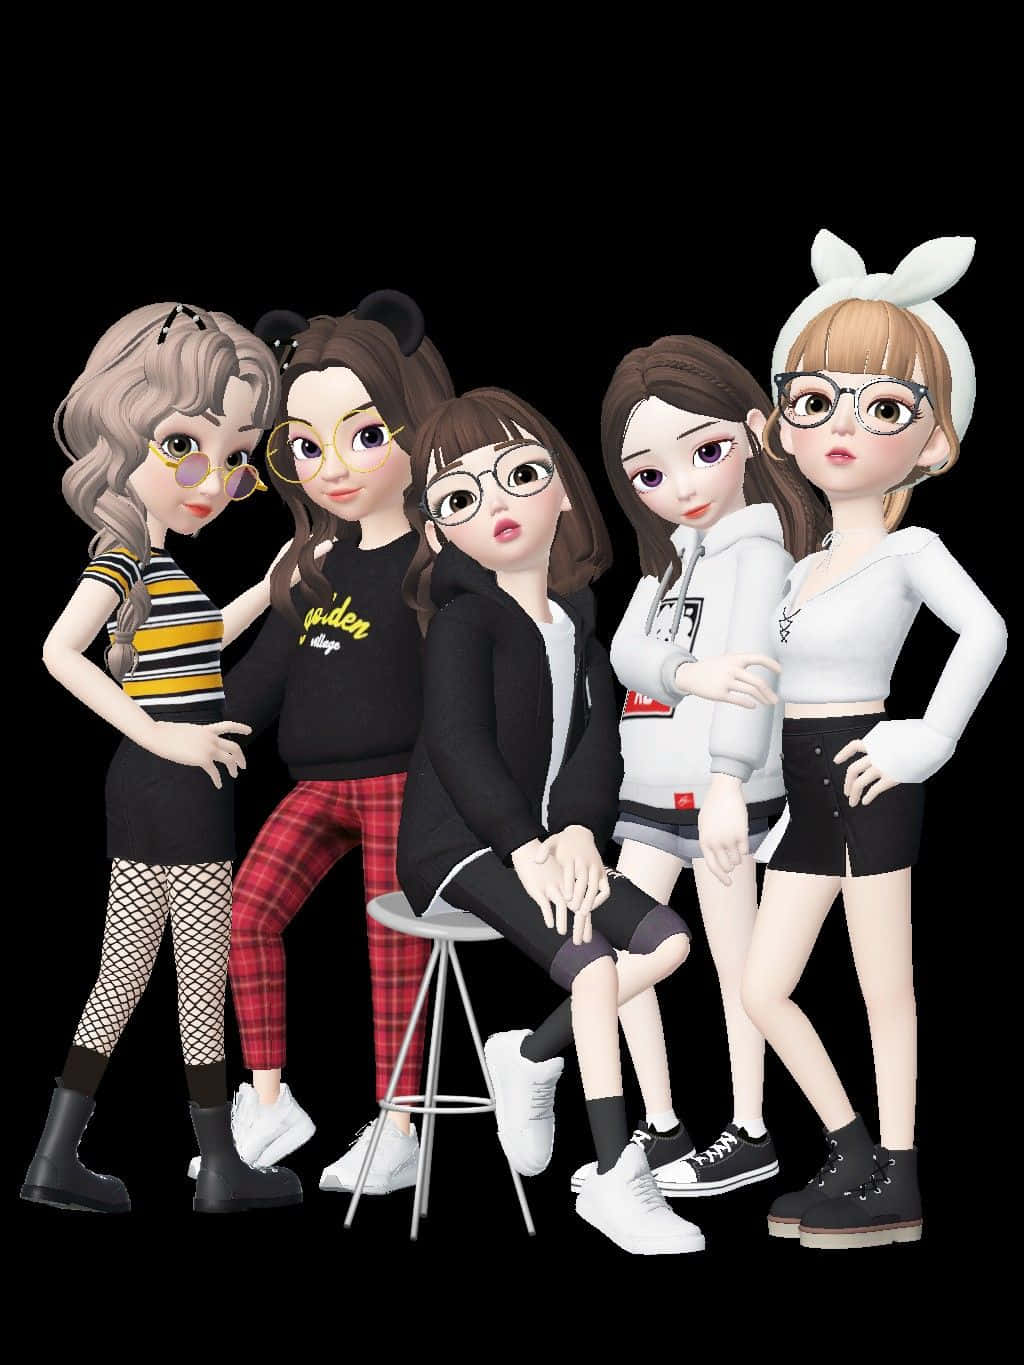 Zepeto Characters Posing in Colorful Digital World